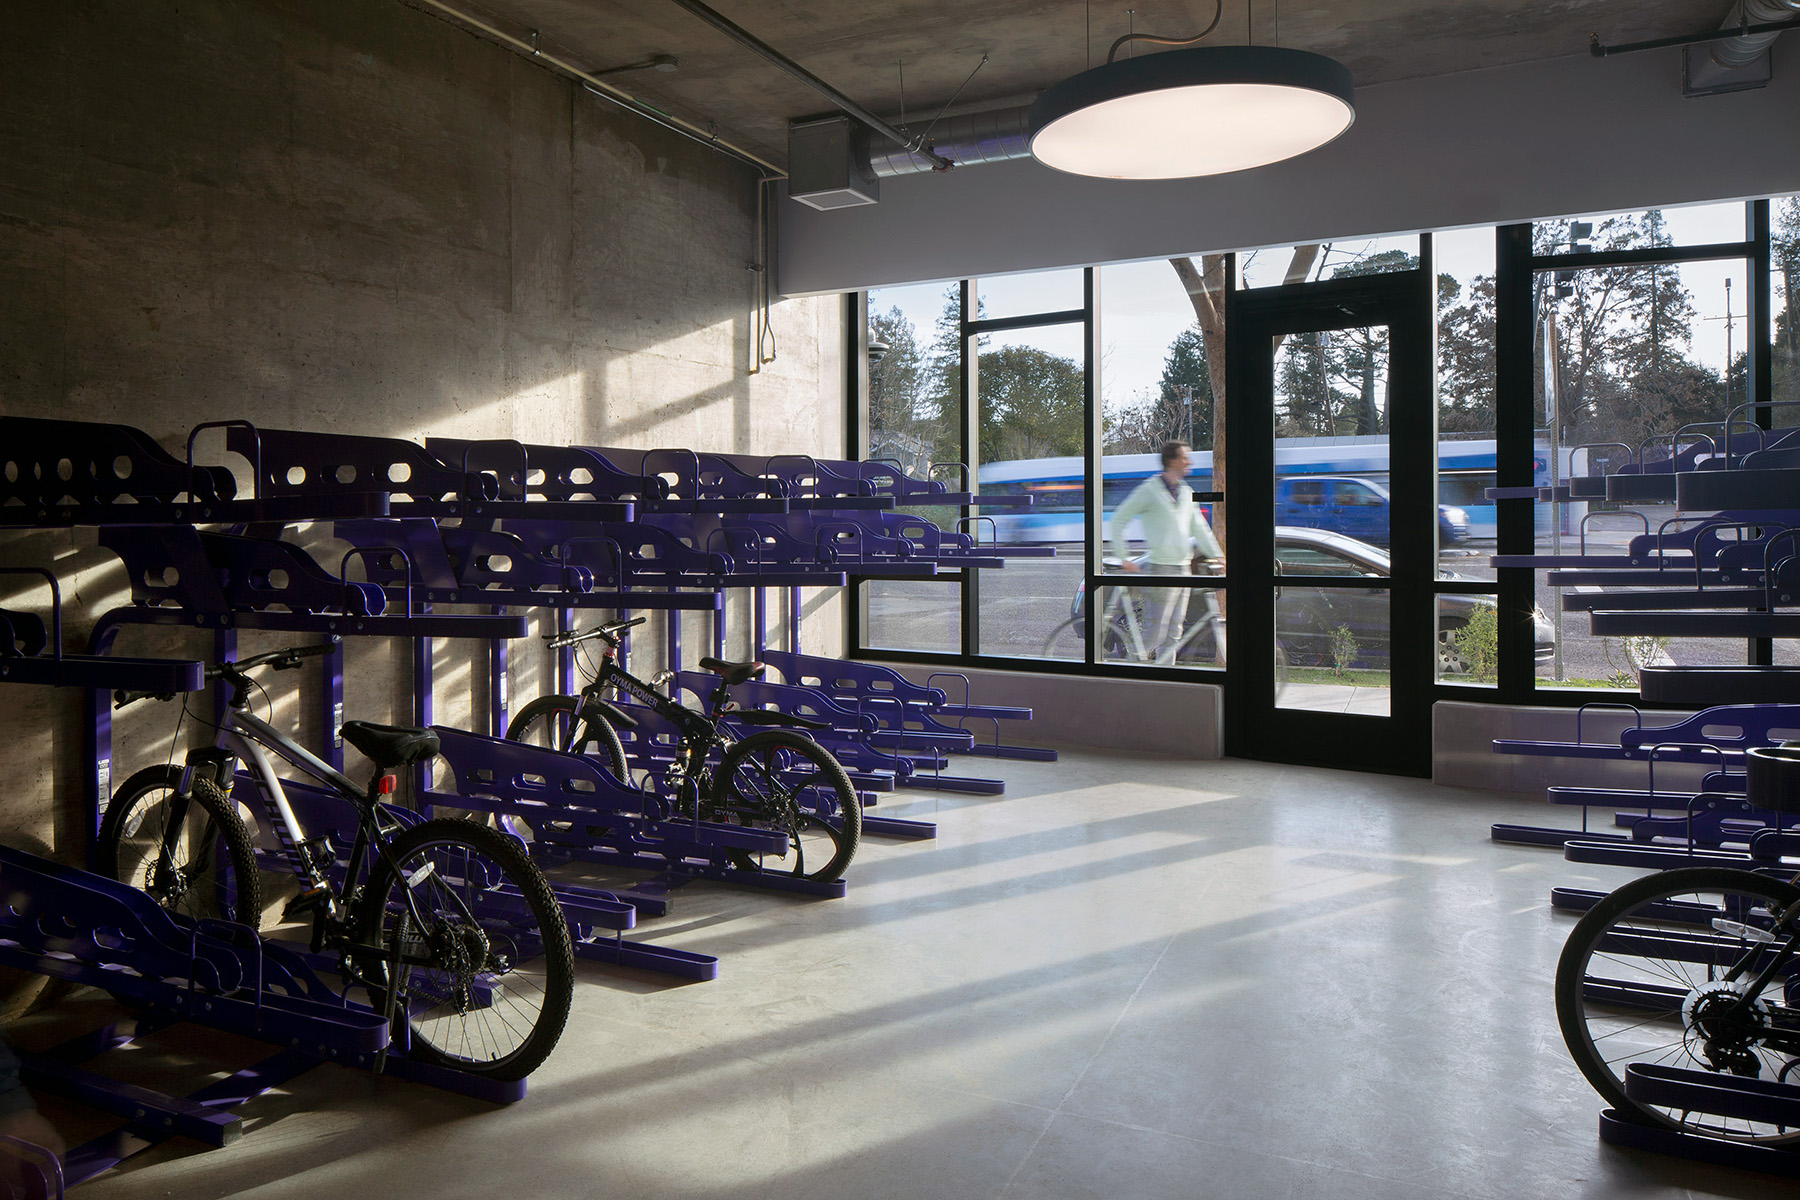  Flush mount disk lights balance with natural light through the front windows of a bicycle storage space at Wilton Court Apartments in Palo Alto, California.
